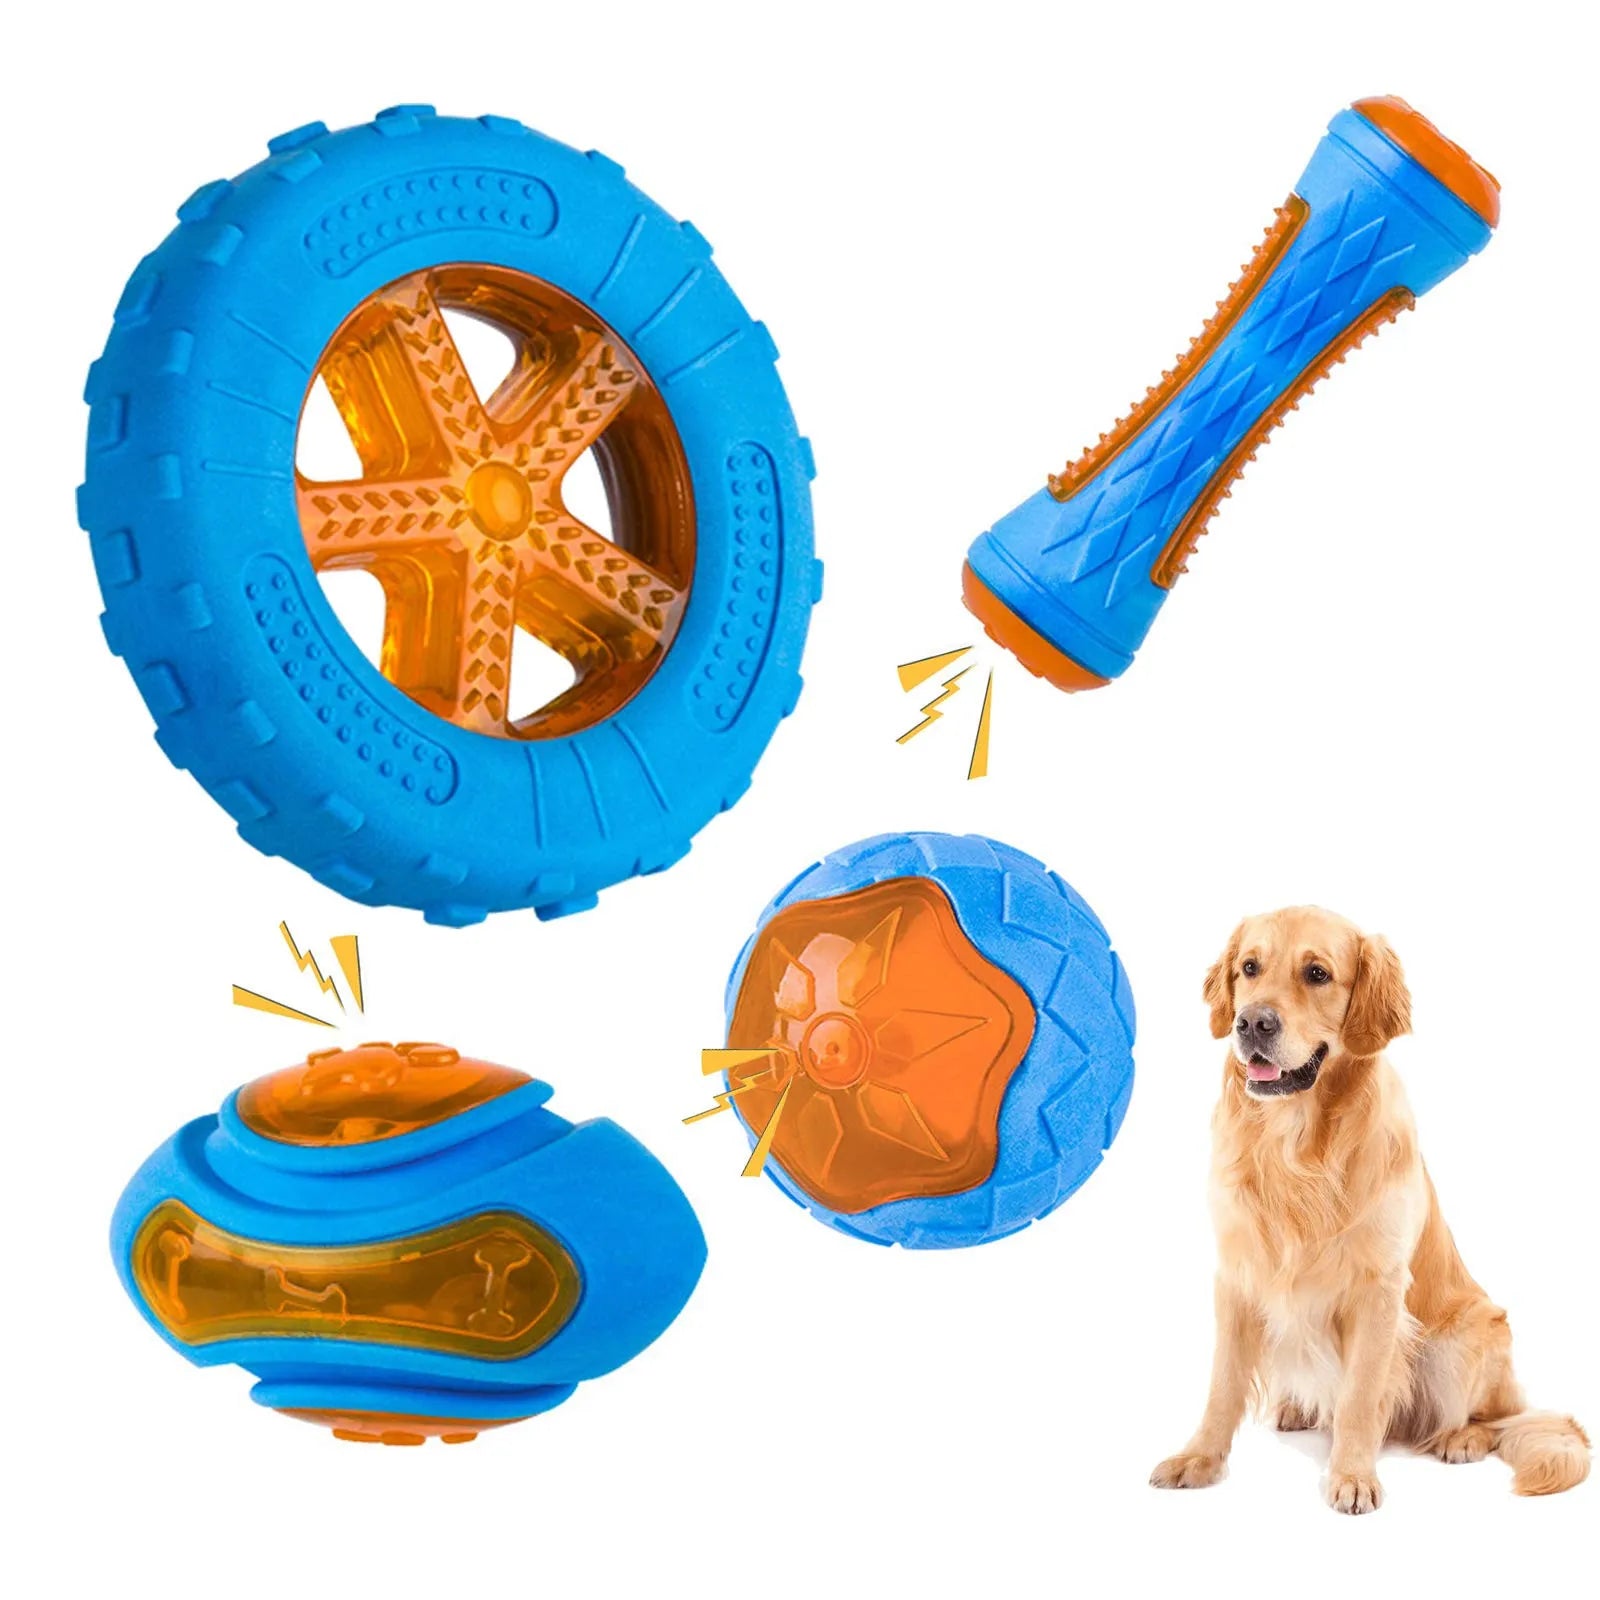 Rubber Dog Toys for Dog Chewing Bite Resistant Squeaky Training Playing Toy Interactive Dog Toys for Large Dogs Teeth Cleaning  petlums.com   